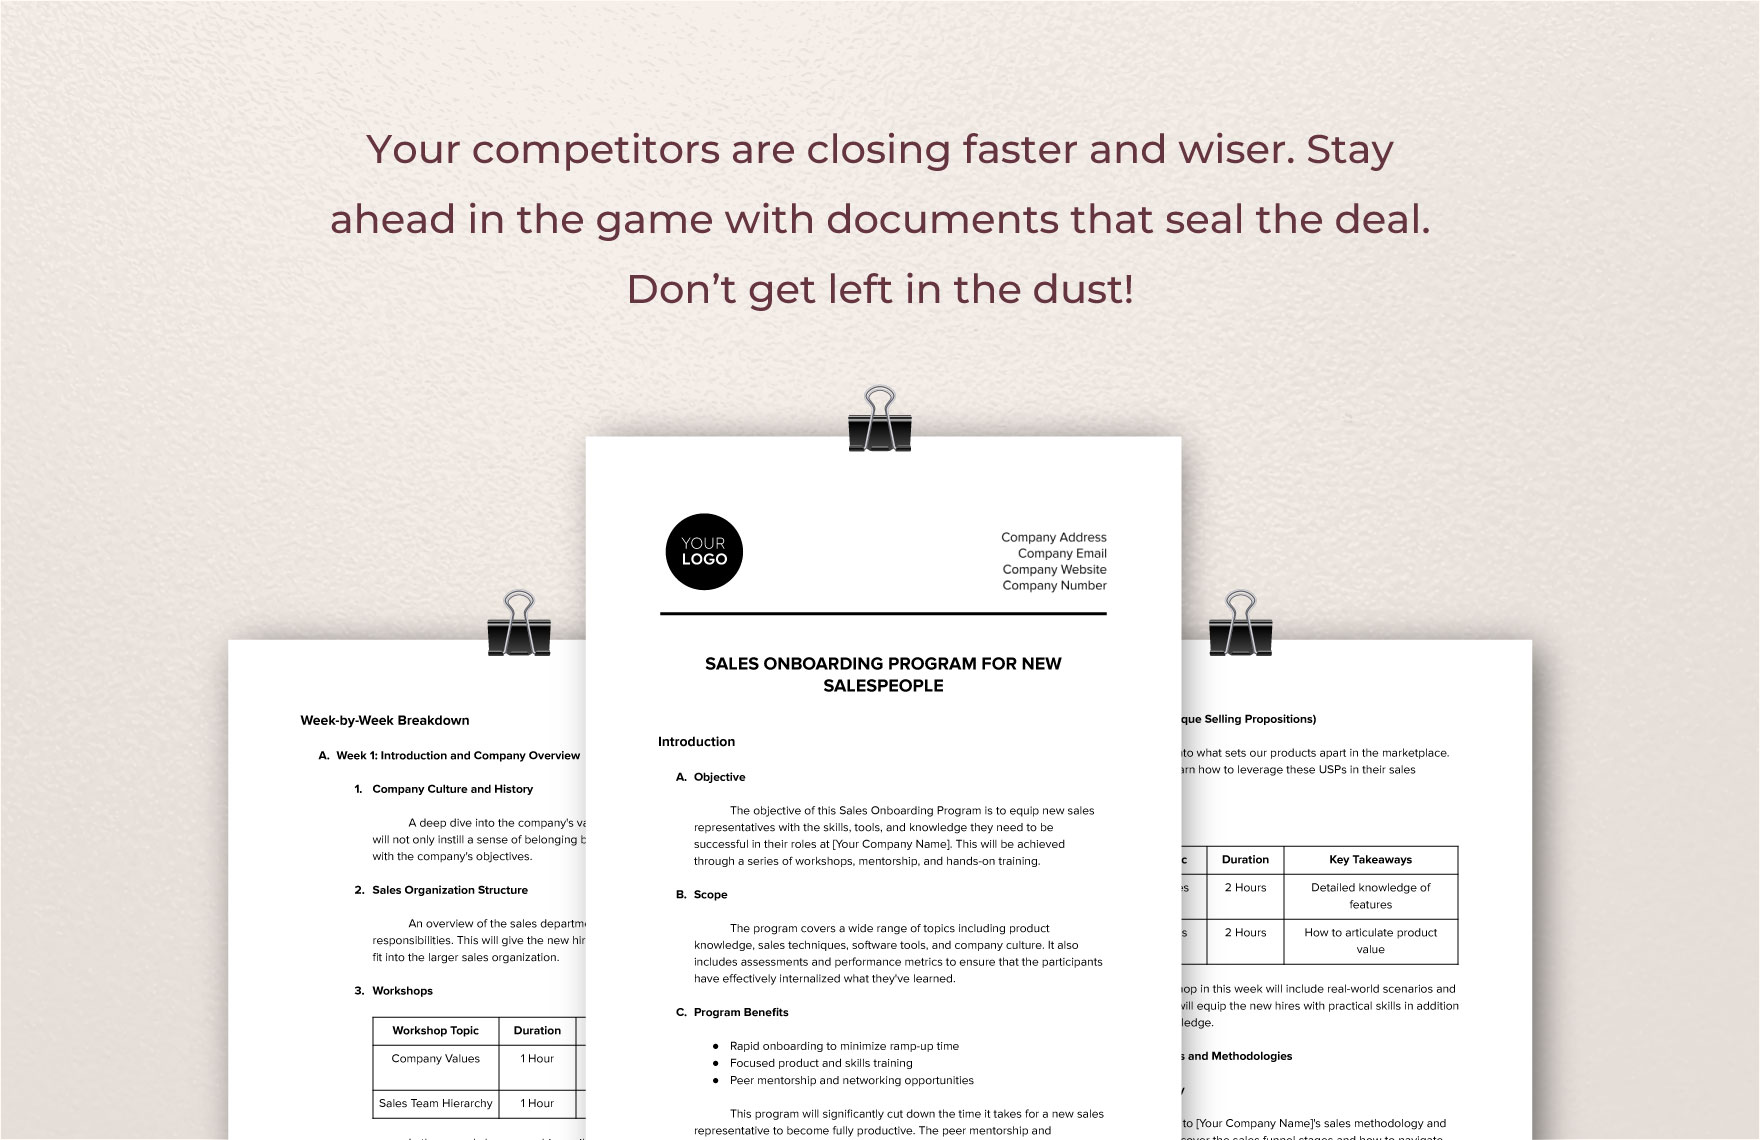 Sales Onboarding Program for New Salespeople Template